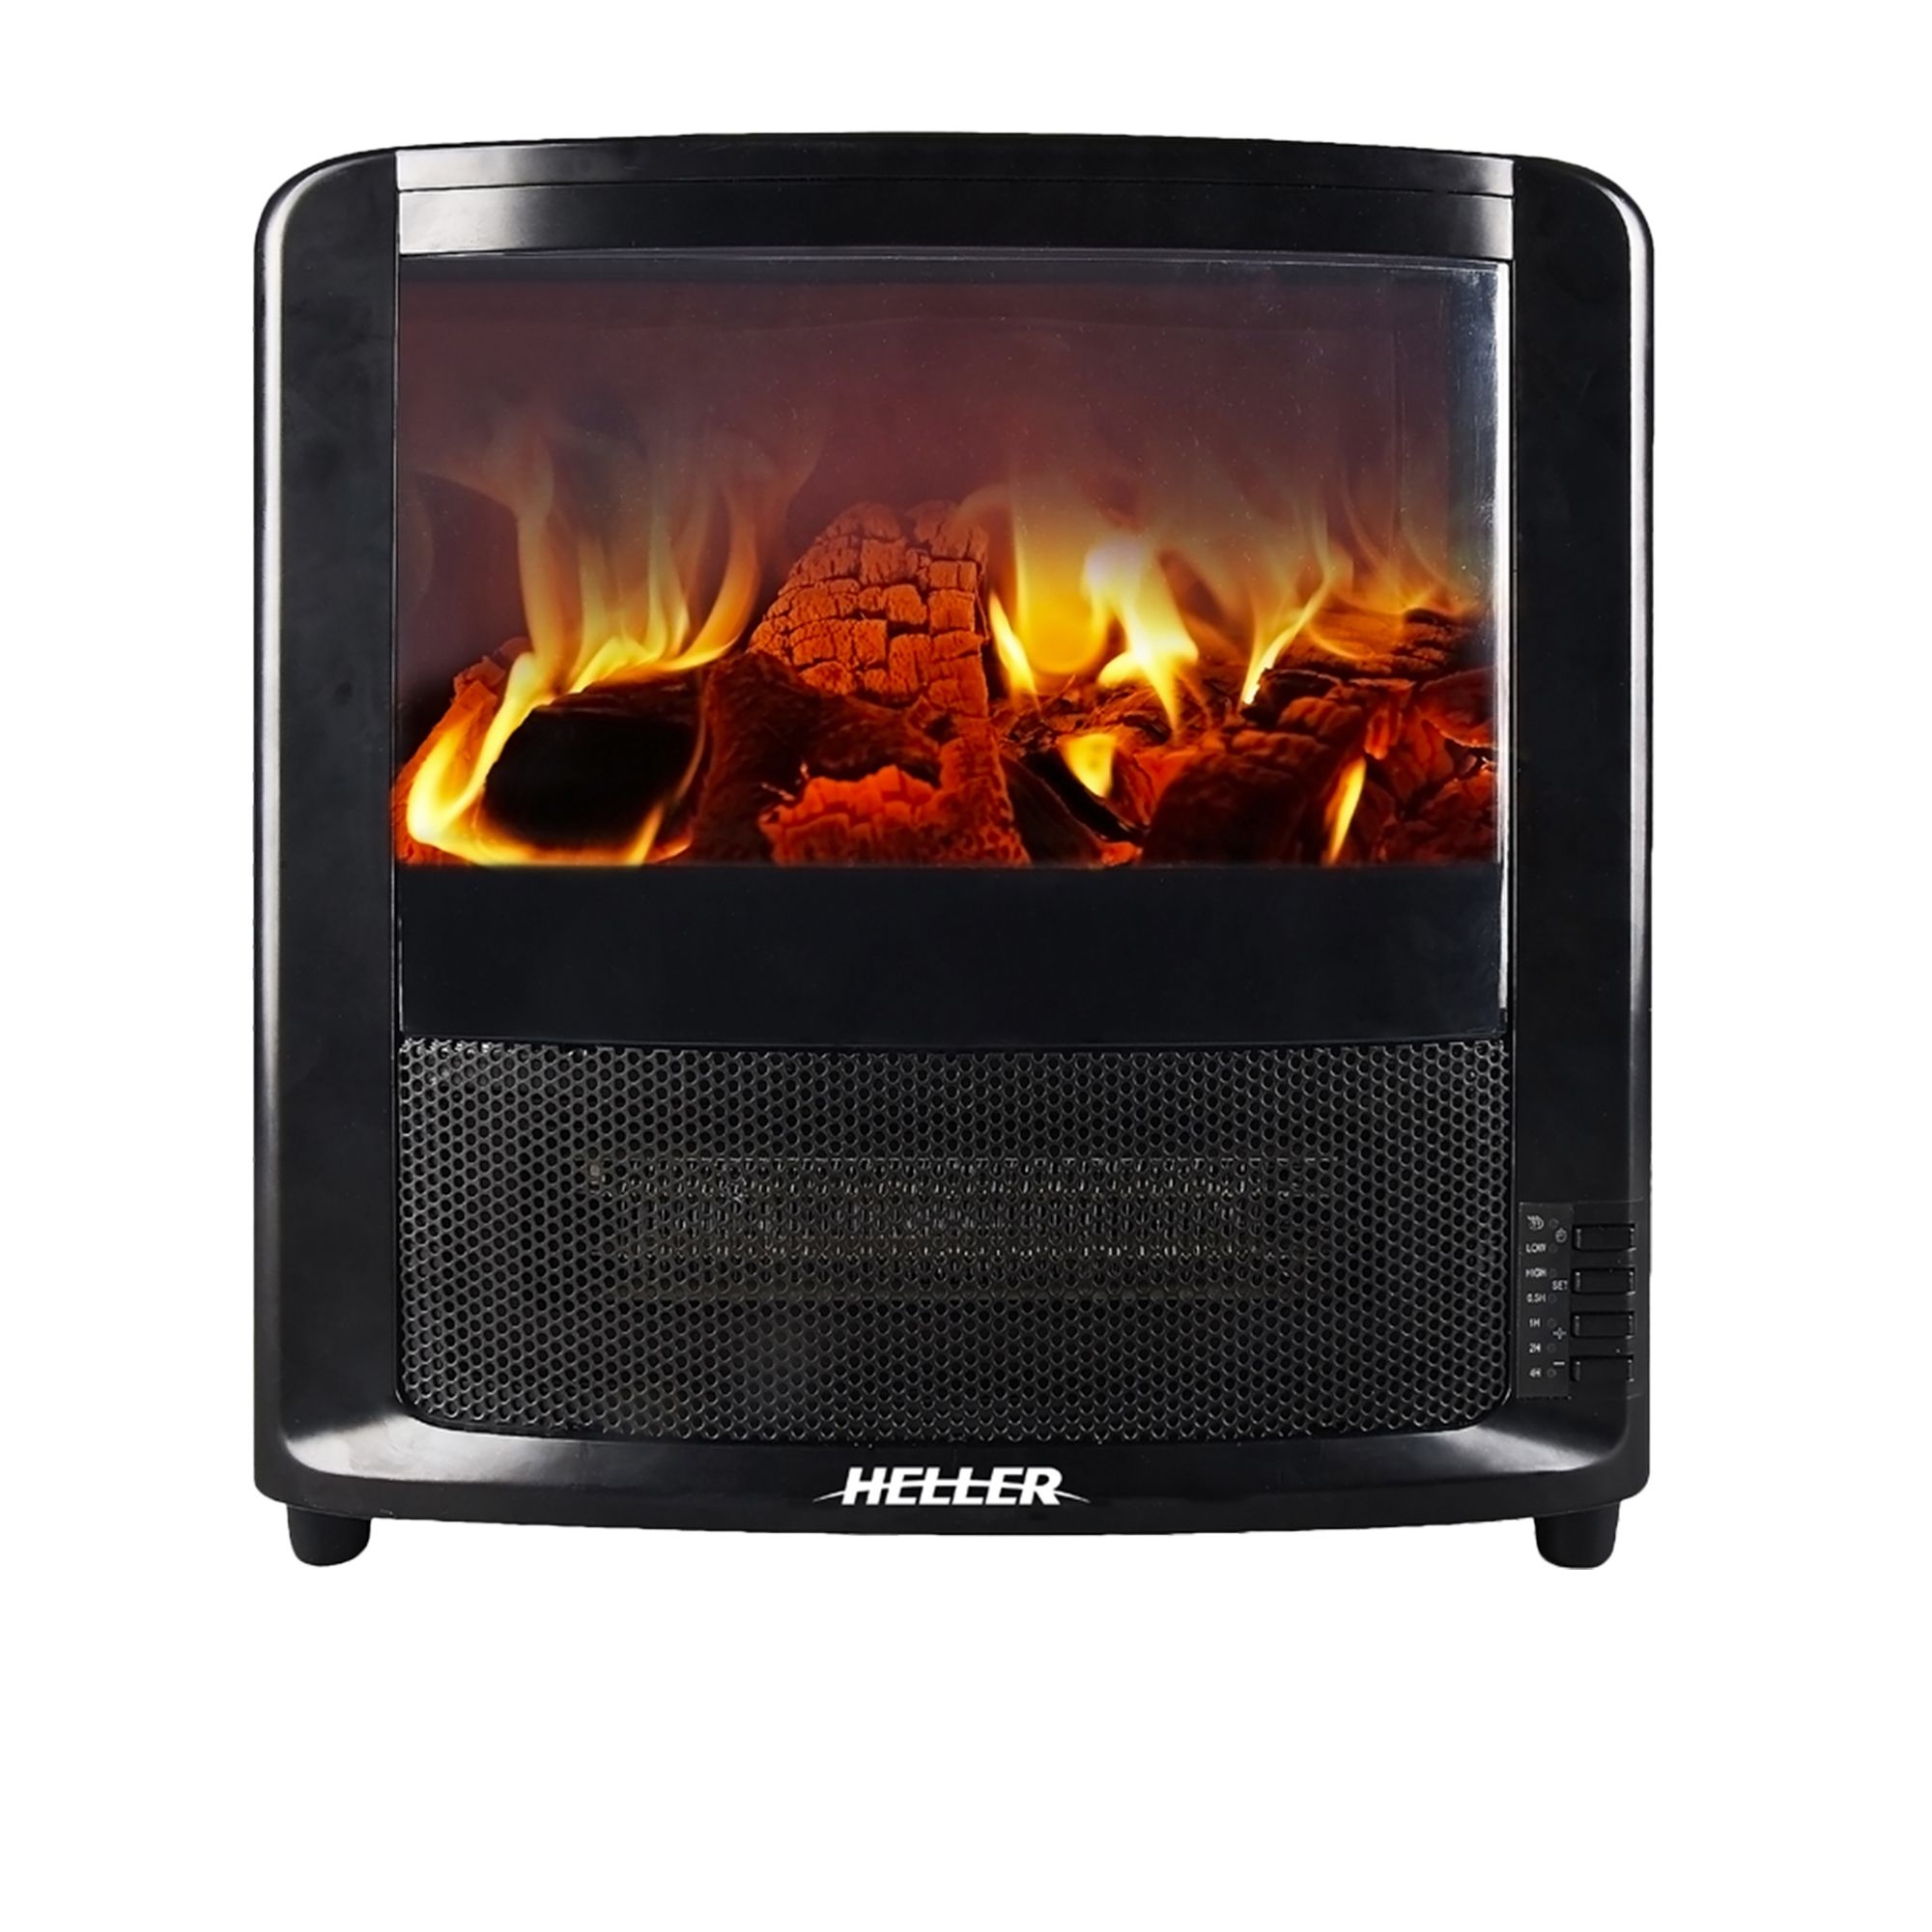 Heller Electric Fireplace 2000W Image 1